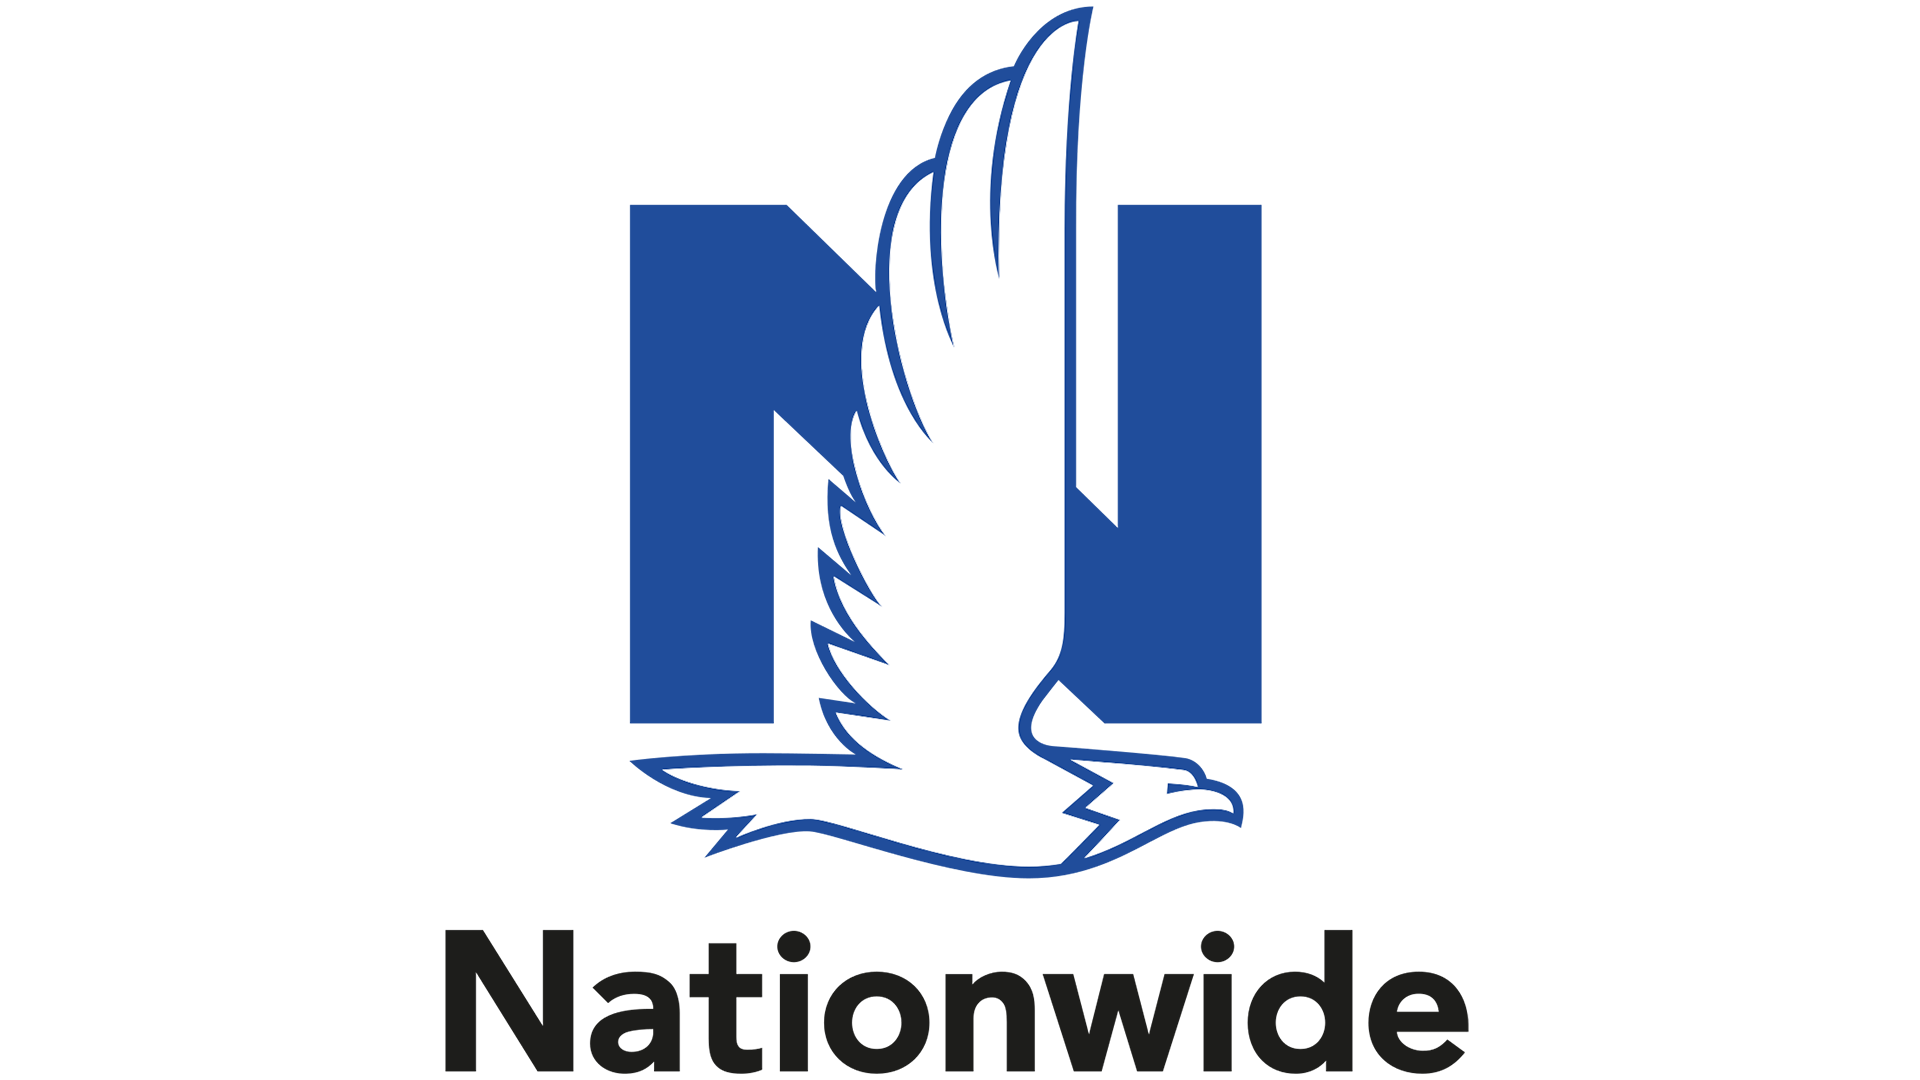 Logo of a company called "Nationwide" its a large blue "N" with an white eagle in the middle - first priority insurance